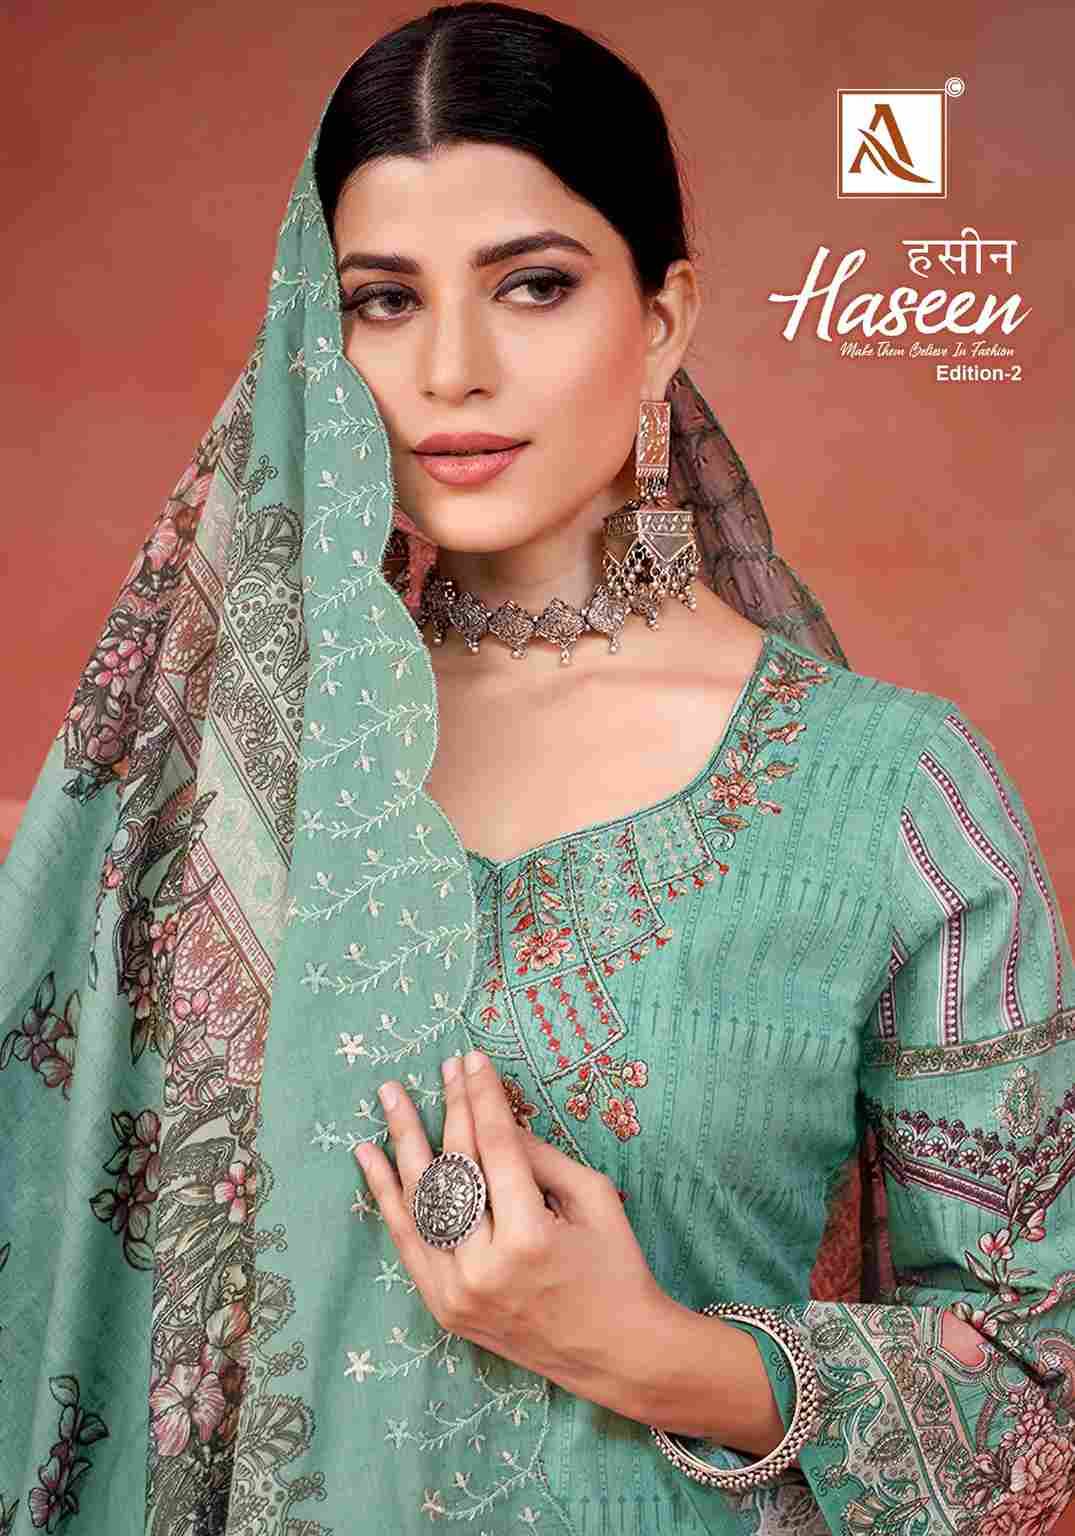 Haseen Vol-2 By Alok Suit 1515-001 To 1515-008 Series Indian Traditional Wear Collection Beautiful Stylish Fancy Colorful Party Wear & Wear Cambric Cotton Dress At Wholesale Price